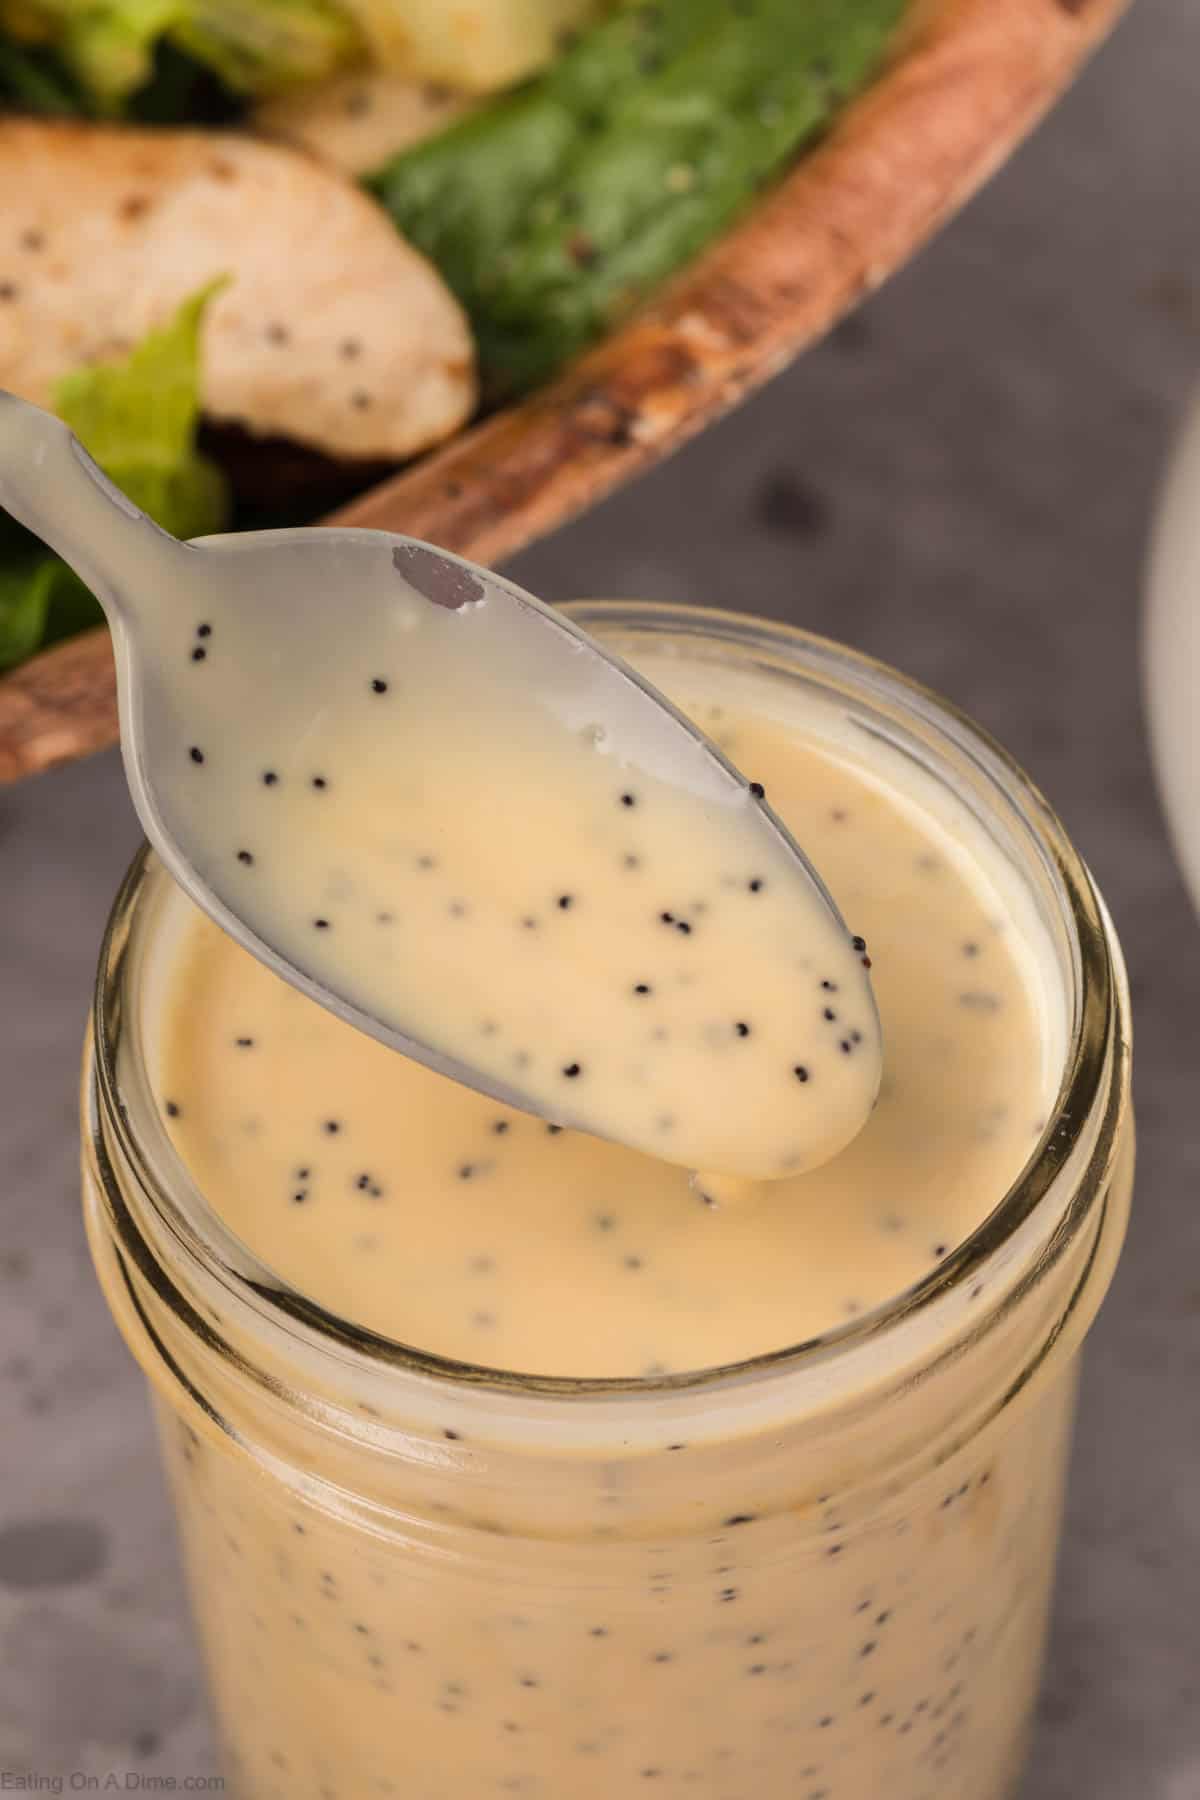 Poppyseed salad dressing in a mason jar with a small portion on a spoon